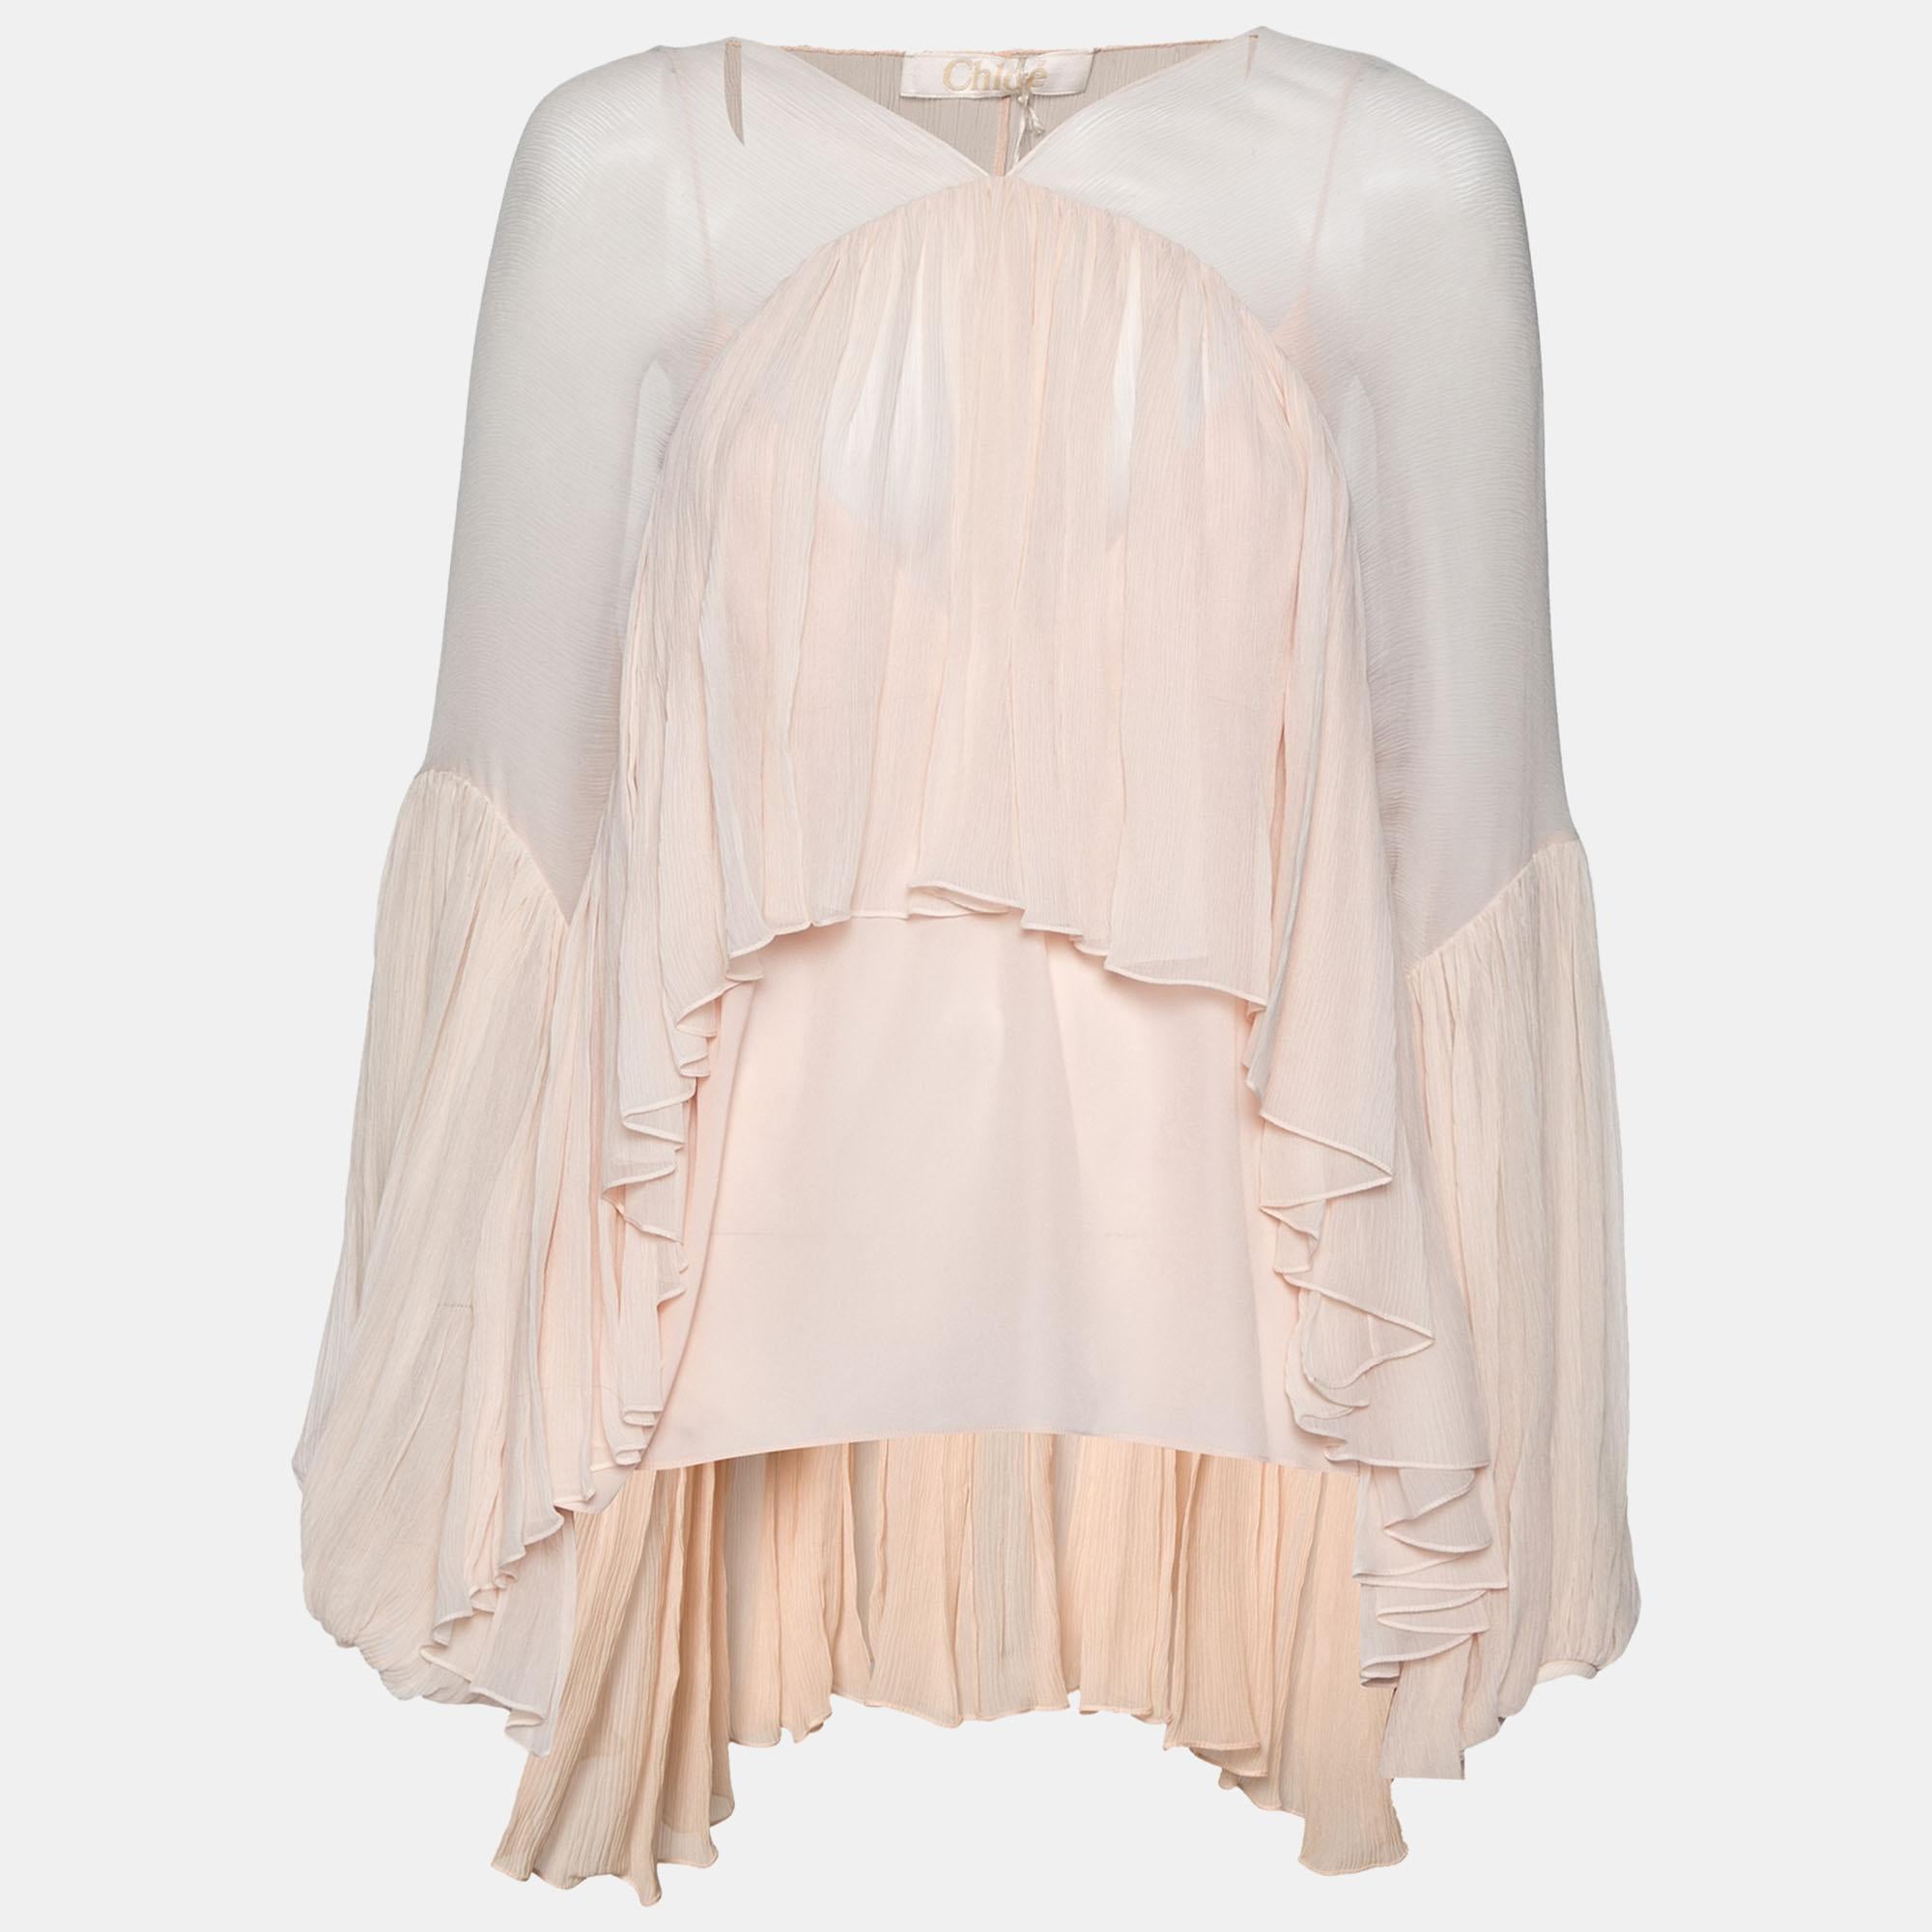 This blouse from Chloe is stitched from silk into an asymmetrical design and is truly pretty. The powder pink blouse has a gathered silhouette and long sleeves. Pair it with skinny jeans to achieve a balanced outfit.

Includes: Price Tag